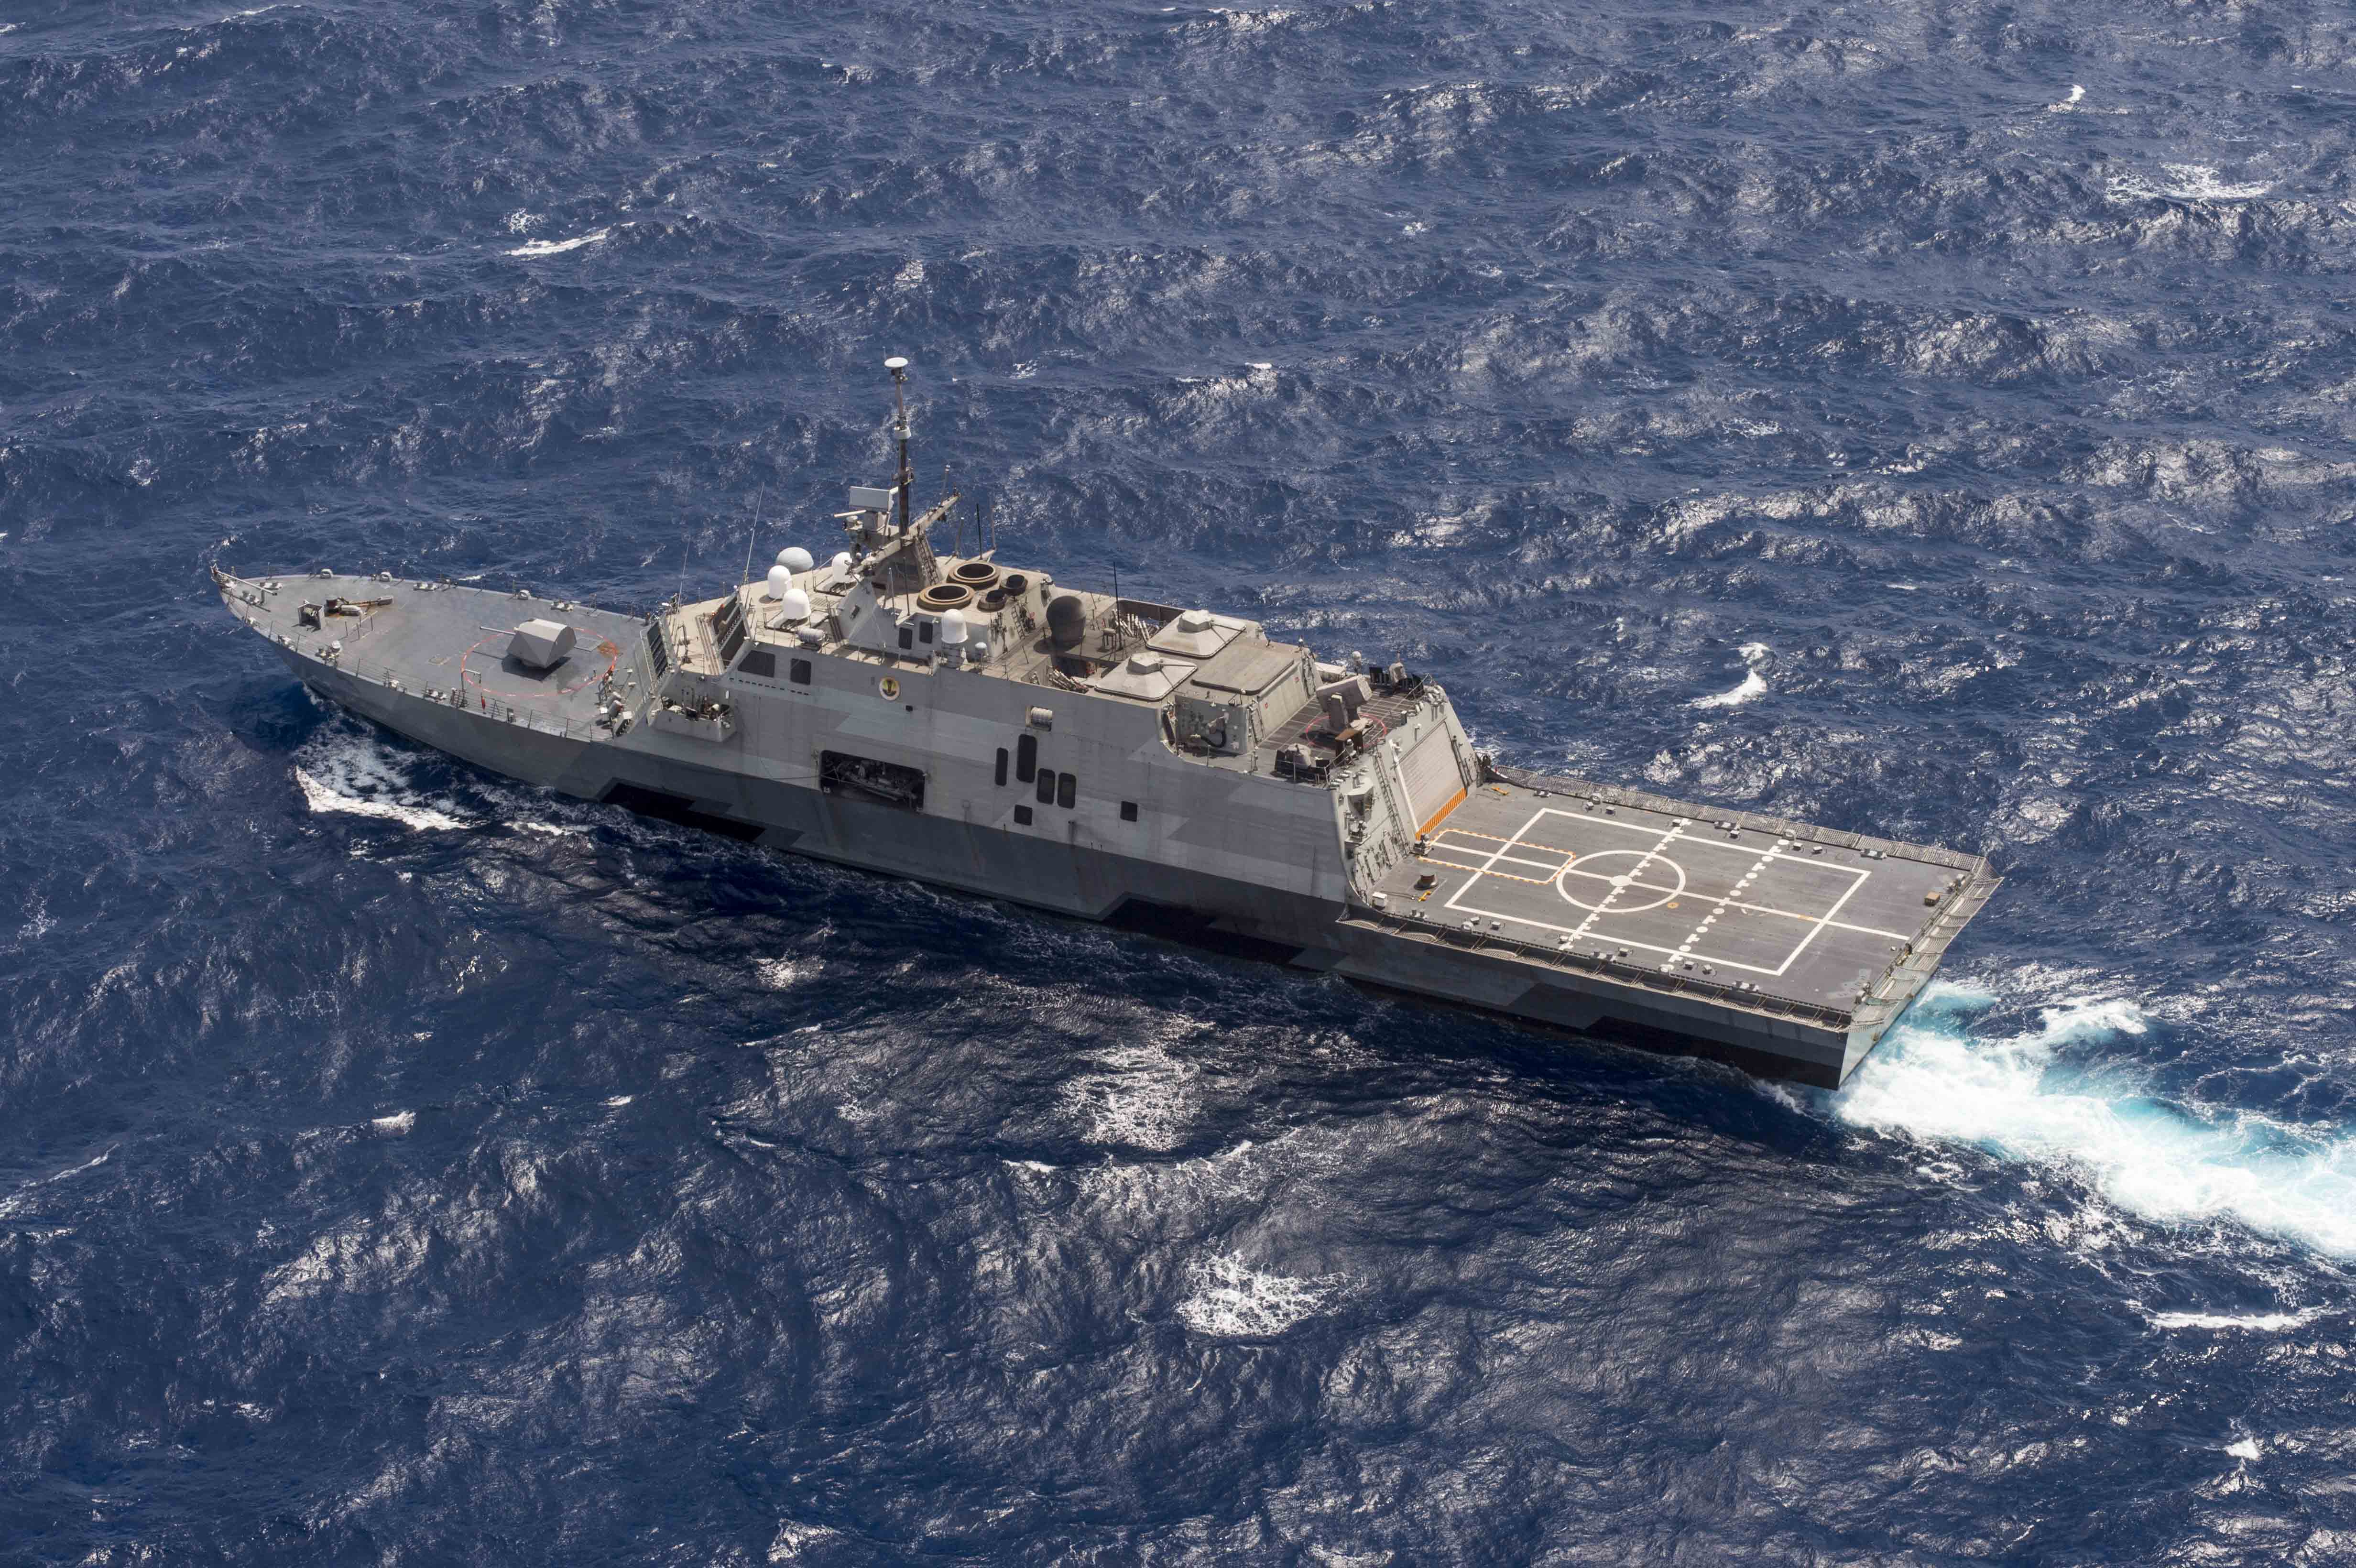 The littoral combat ship USS Fort Worth (LCS 3) transits the South China Sea in July 2015 during a 16-month rotational deployment in support of the Indo-Asia-Pacific rebalance. US Navy photo.